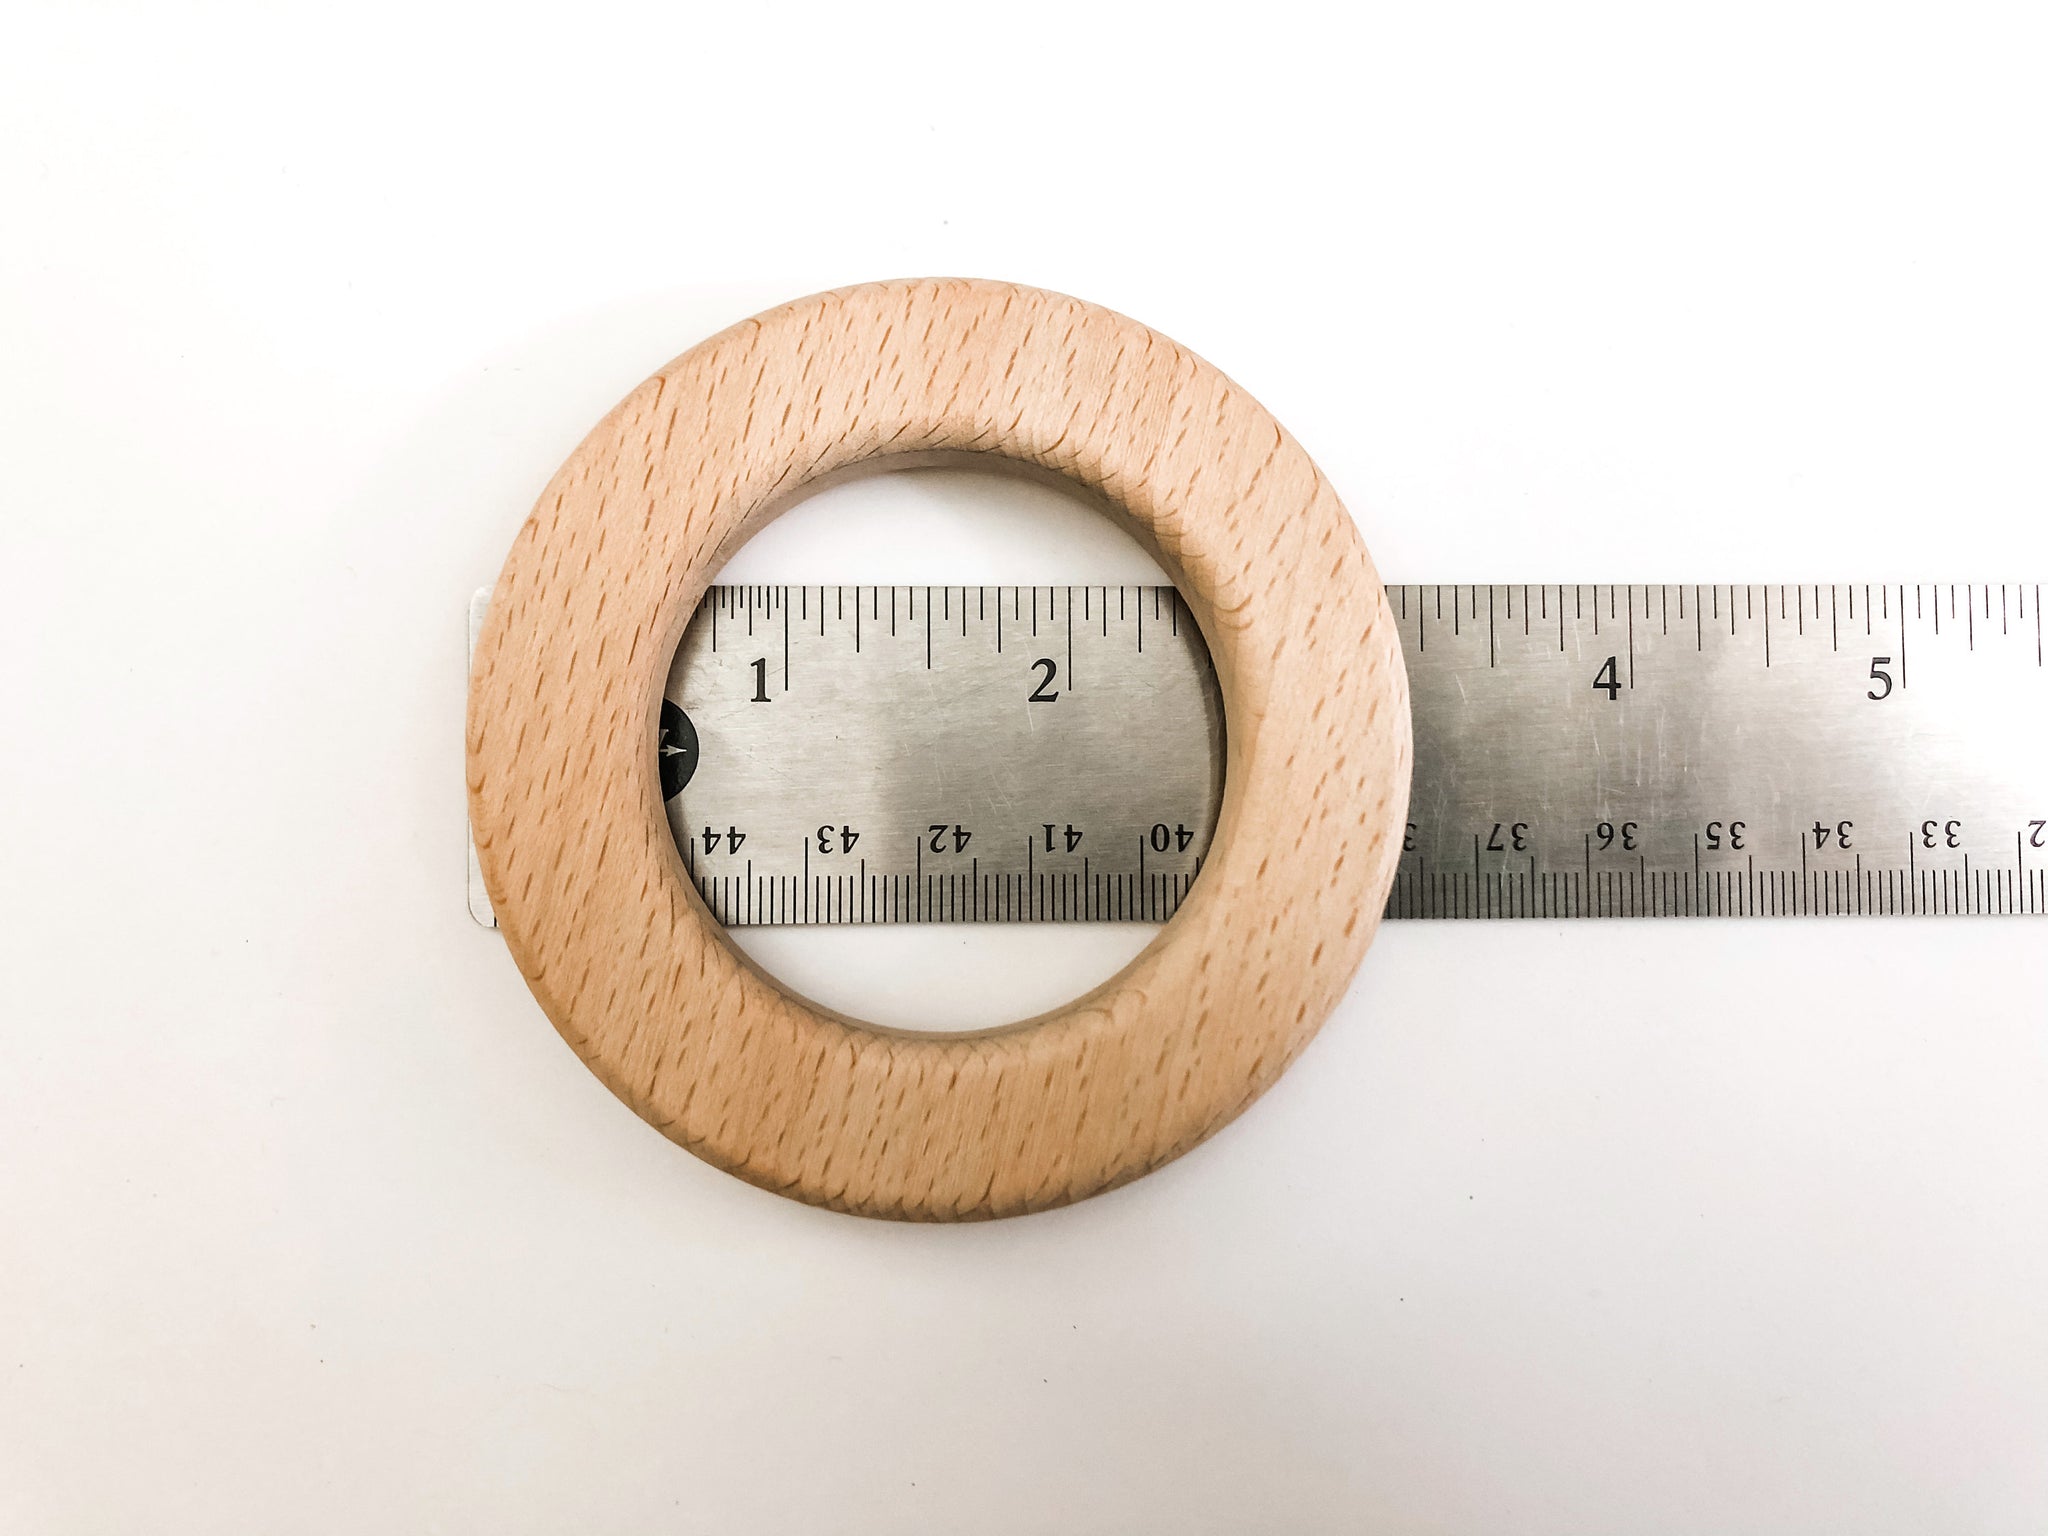 3.14 Inch 80 mm Round Flat Wood Rings - Beech Wood - Food Safe Finish - Wood Jewelry Parts - Wood Toy Ring - Wood Jewelry Ring